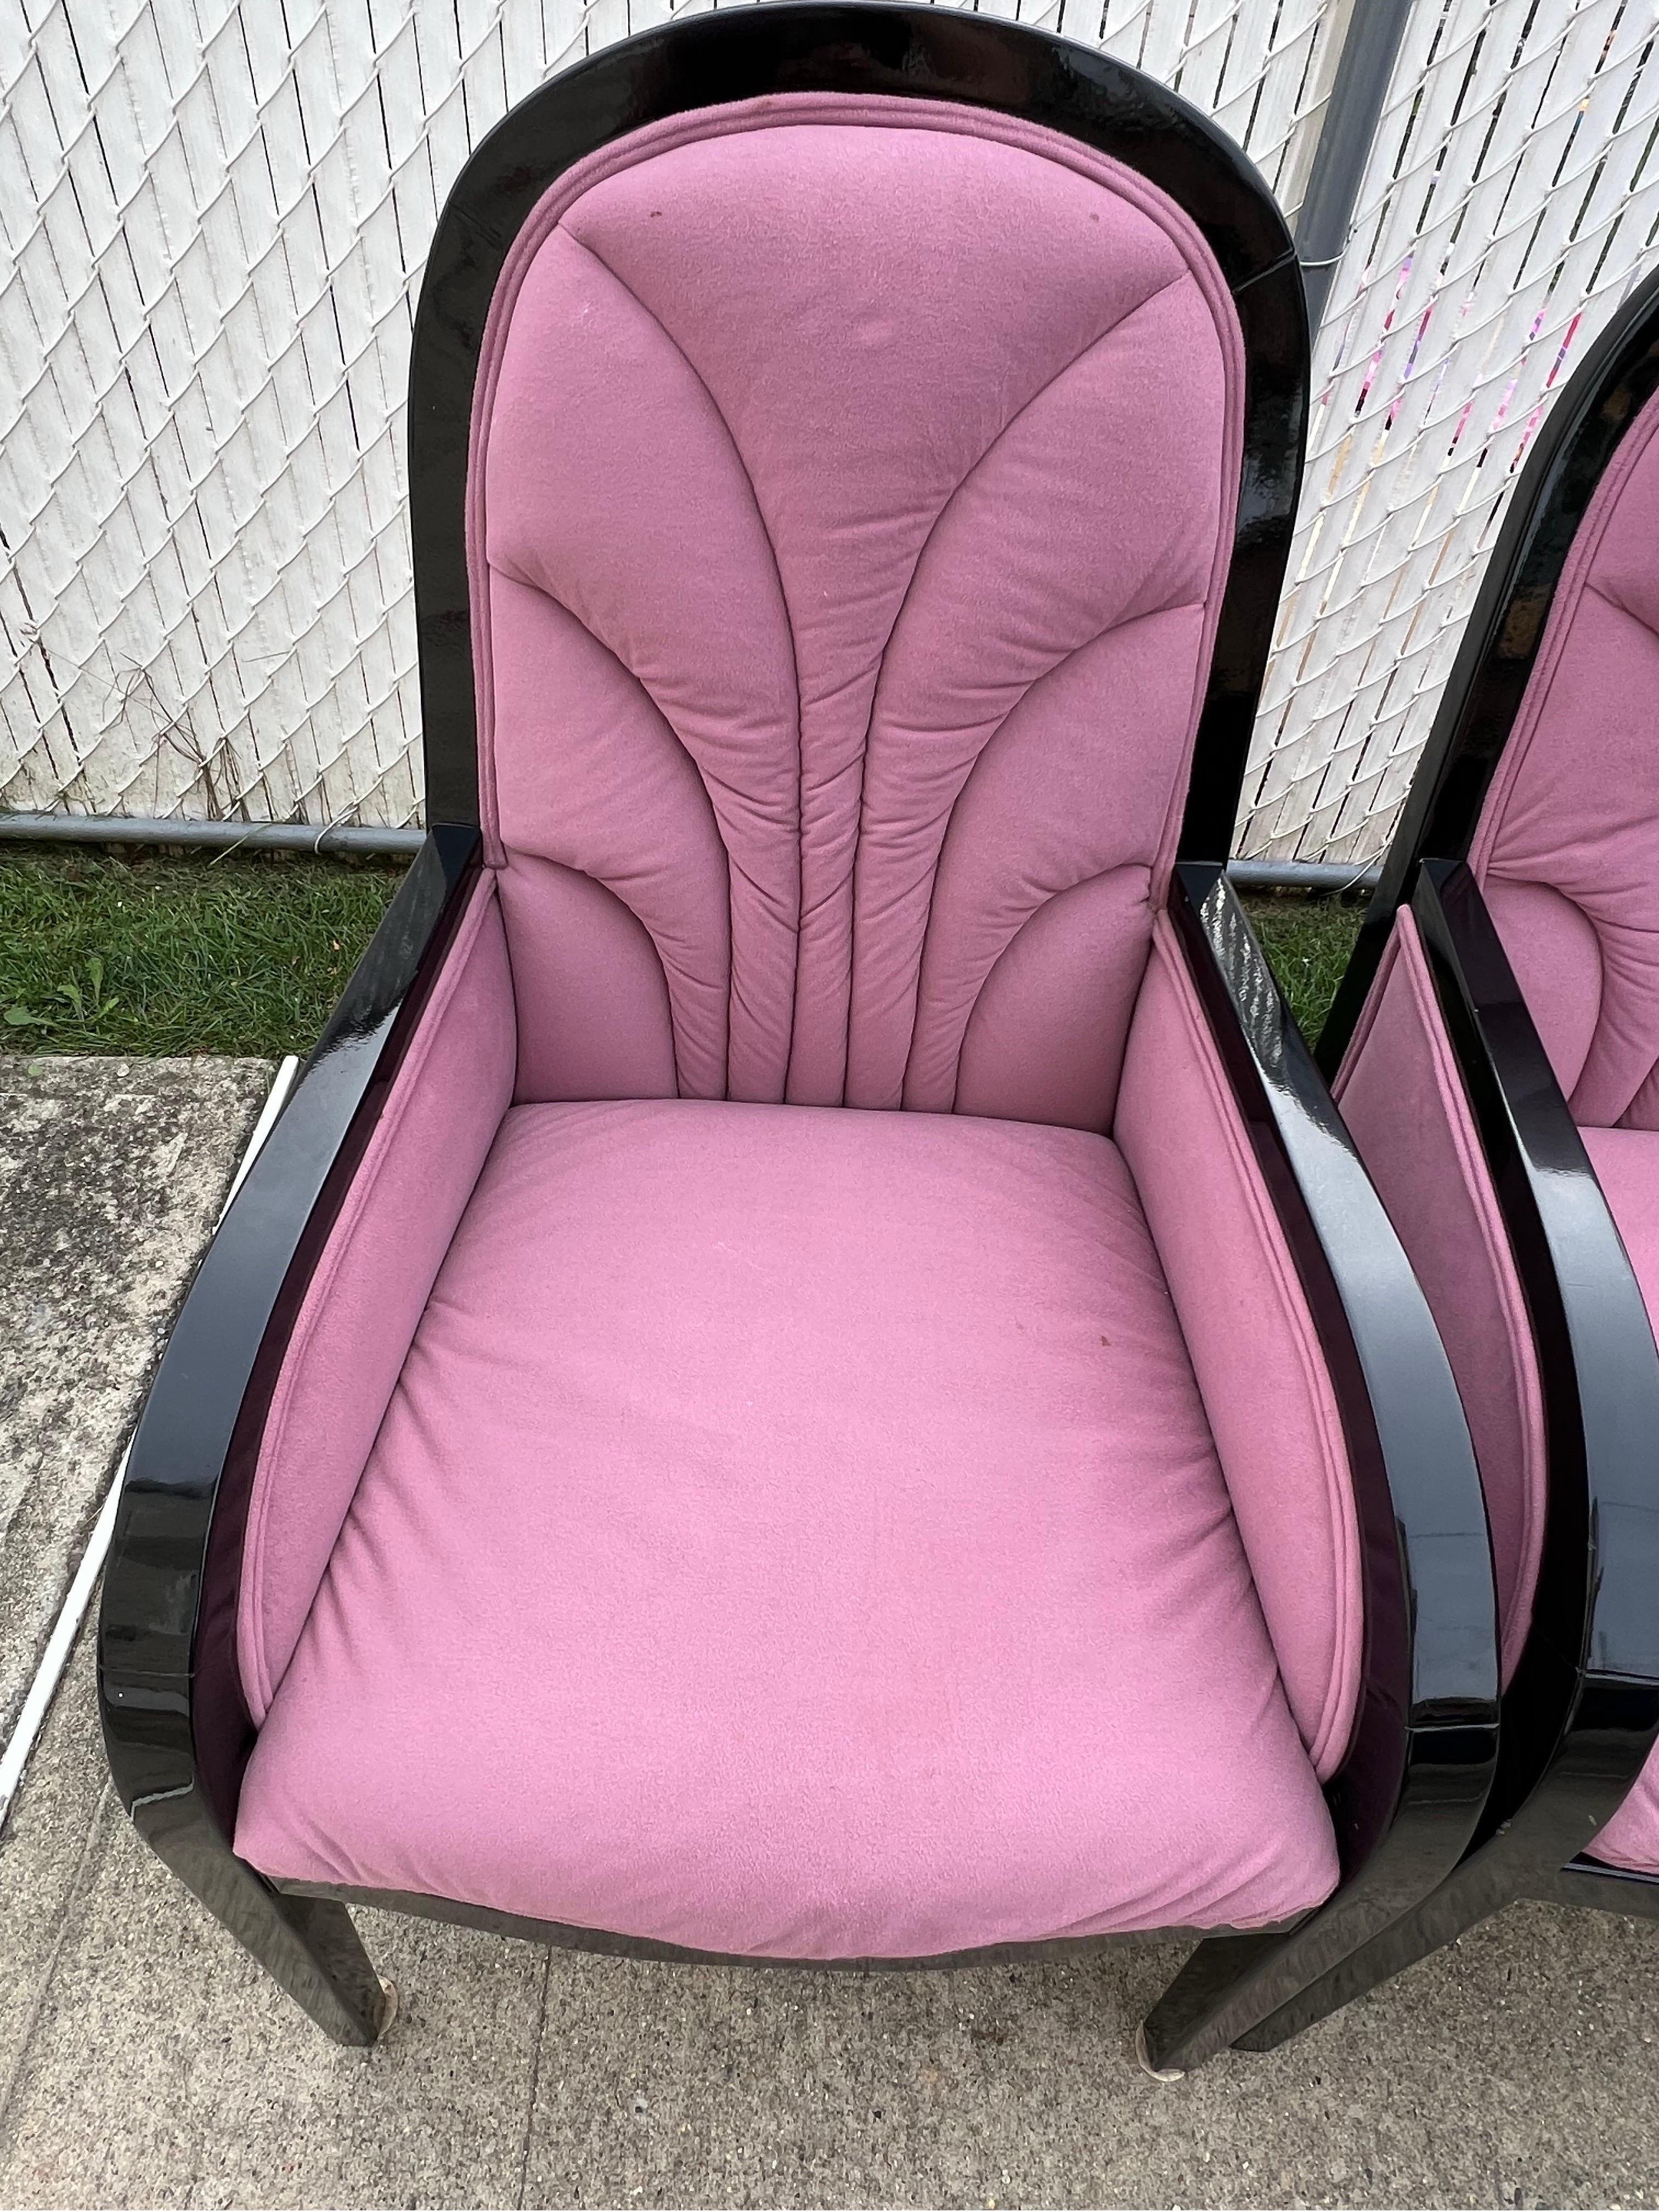 1980s Black Lacquered Pink Velvet Dining Chairs - a Set of 4 For Sale 2